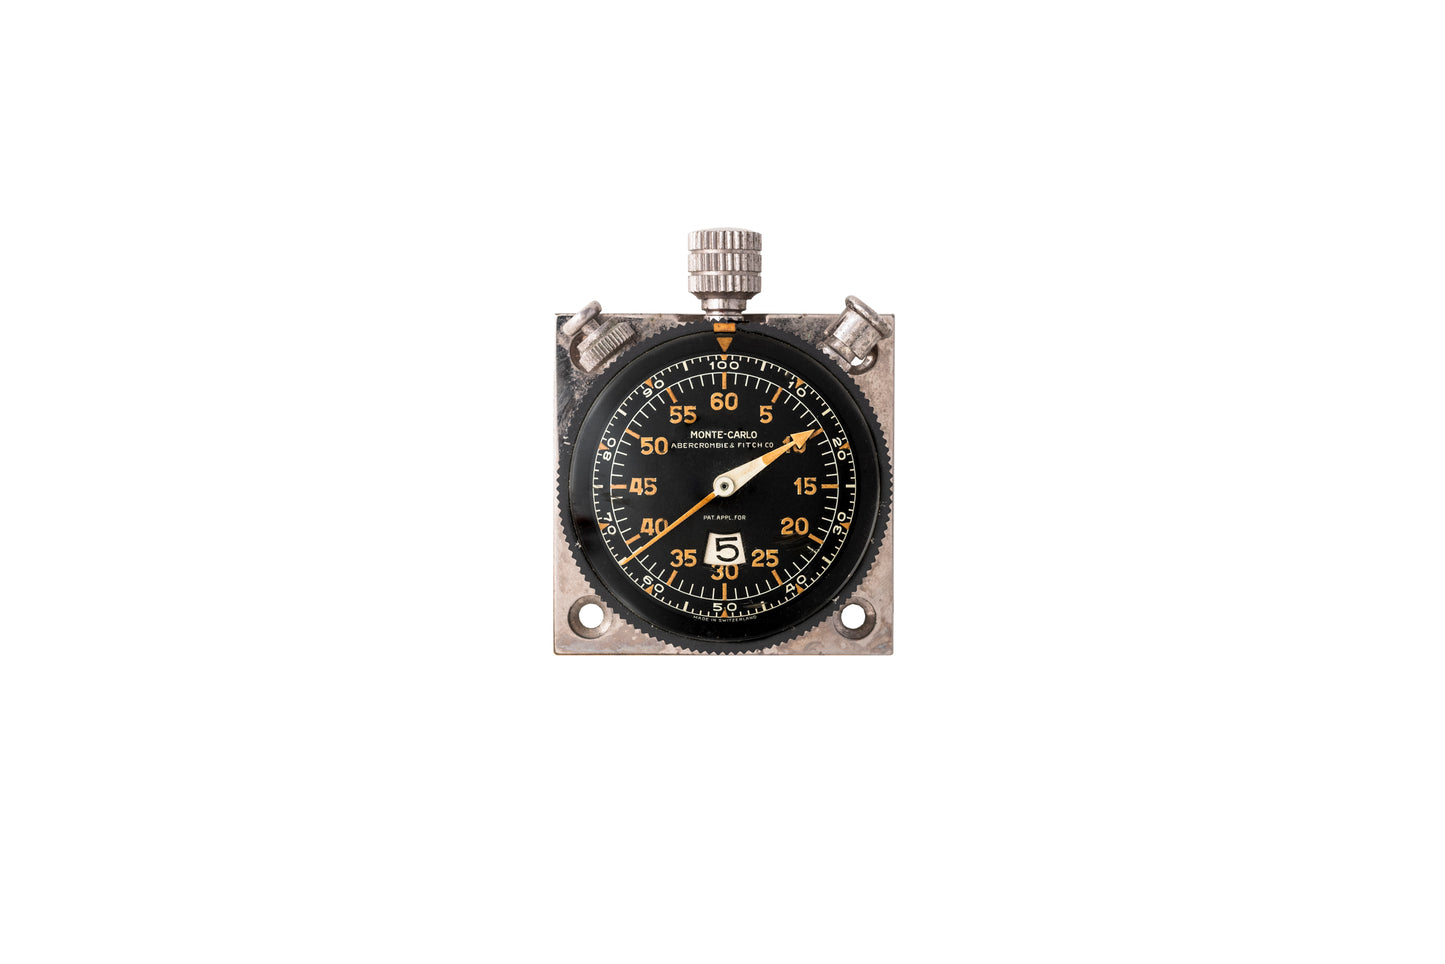 Heuer Monte Carlo Dash Timer for Abercrombie & Fitch